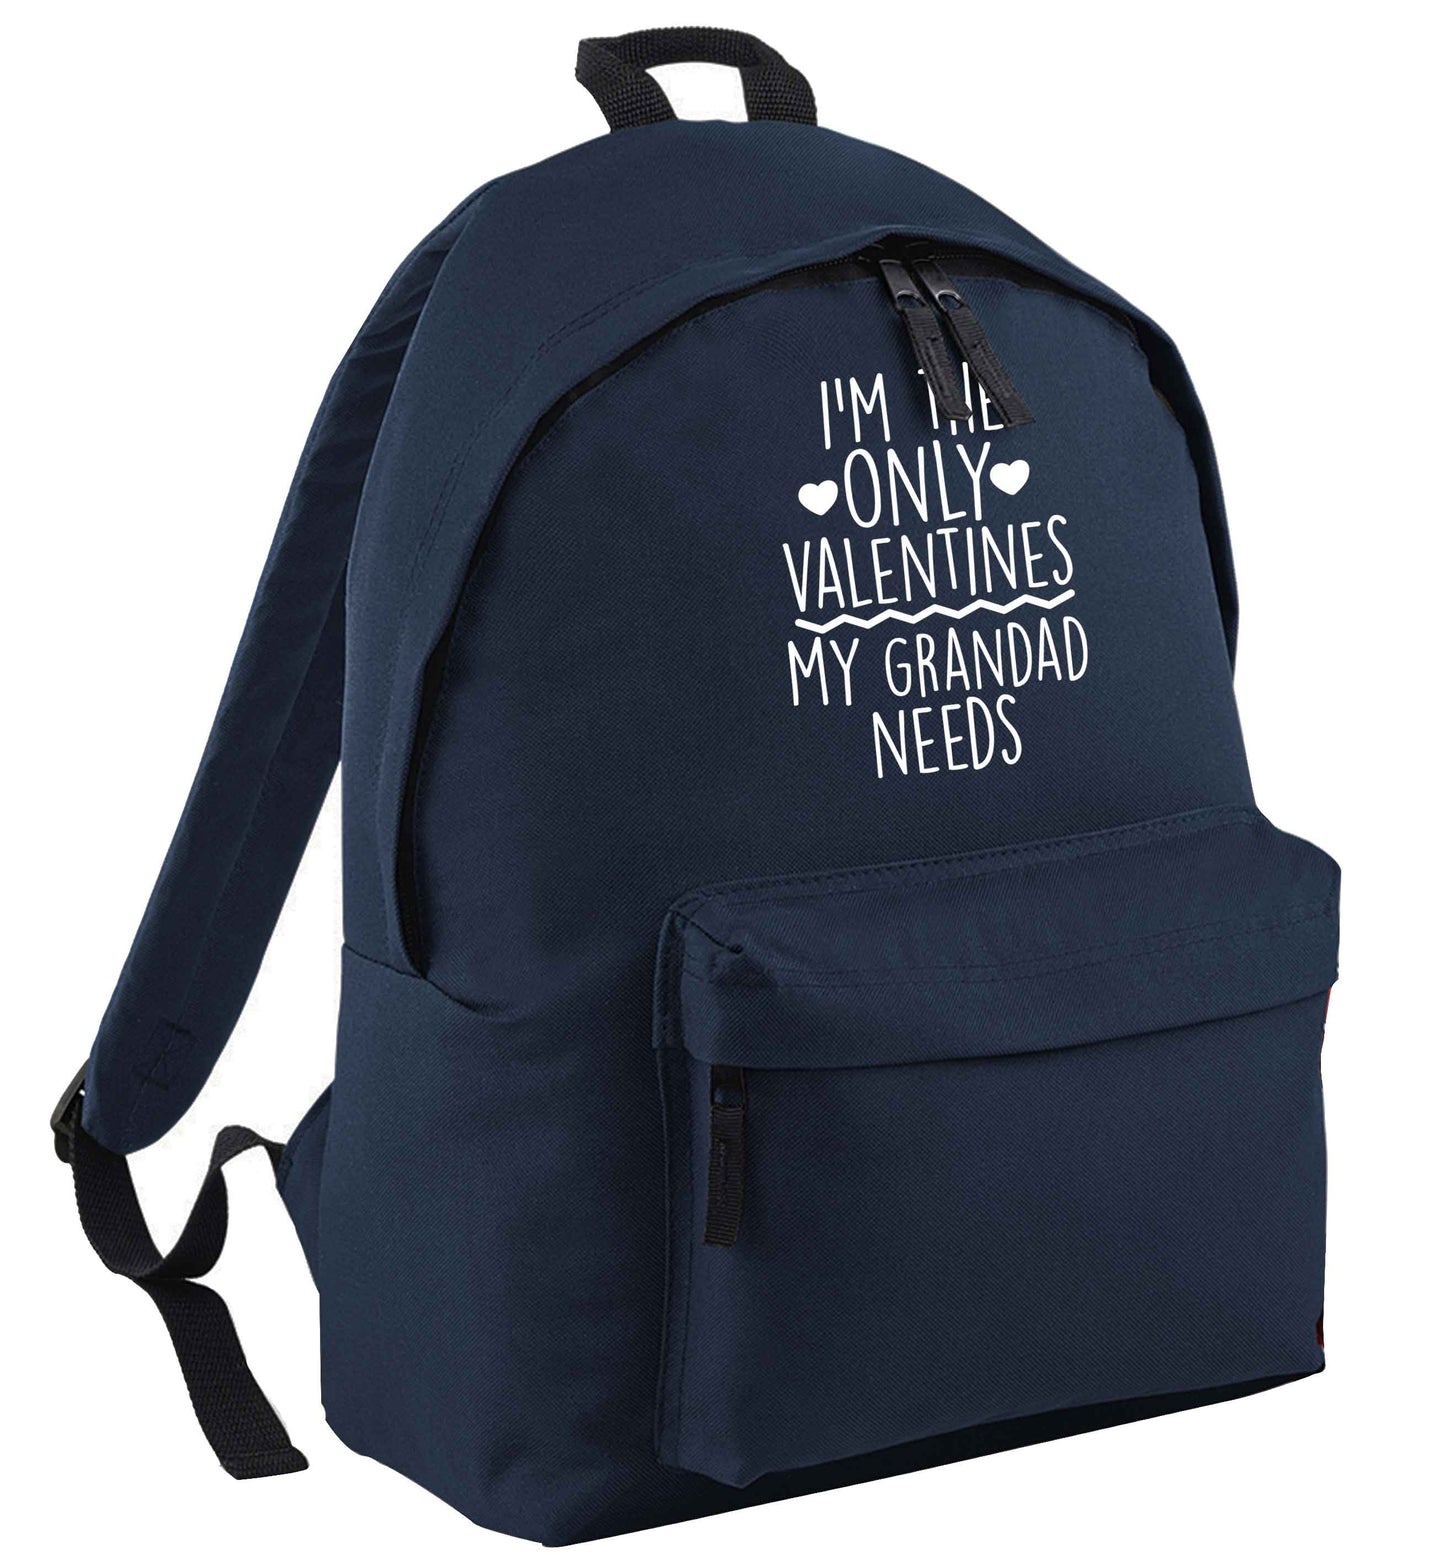 I'm the only valentines my grandad needs navy childrens backpack